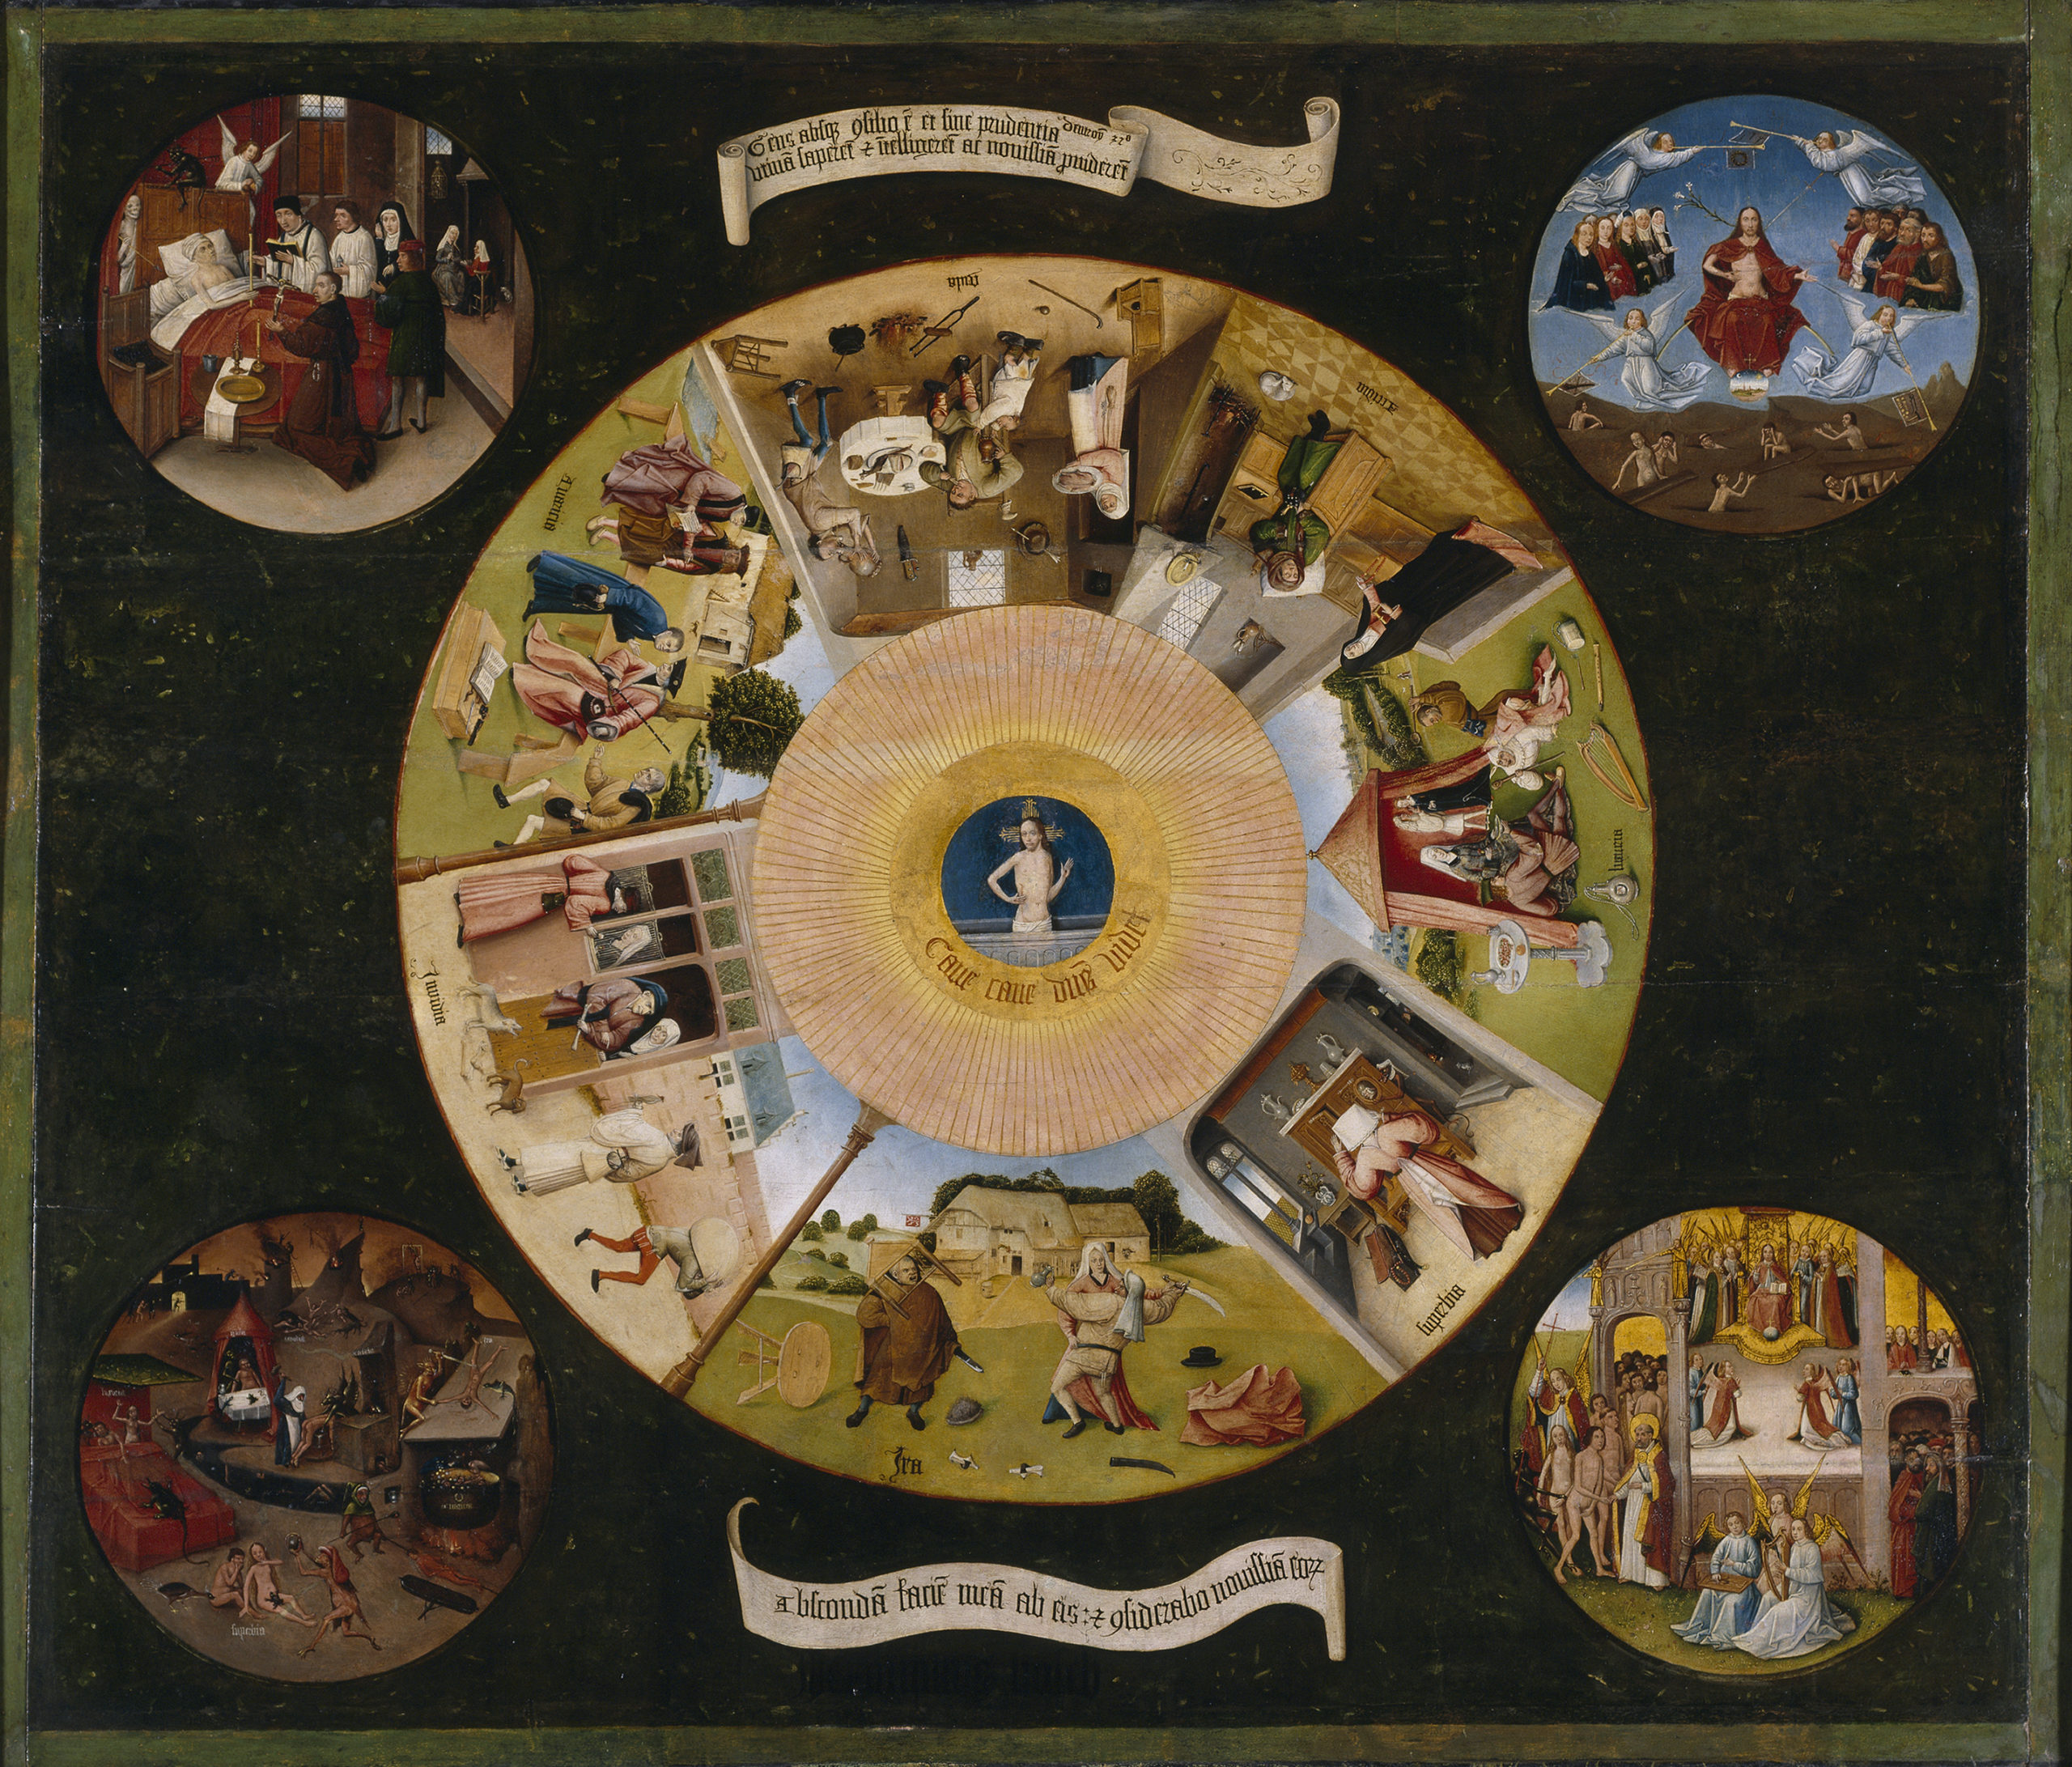 Image of the painting The Seven Deadly Sins and the Four Last Things by Hieronymus Bosch